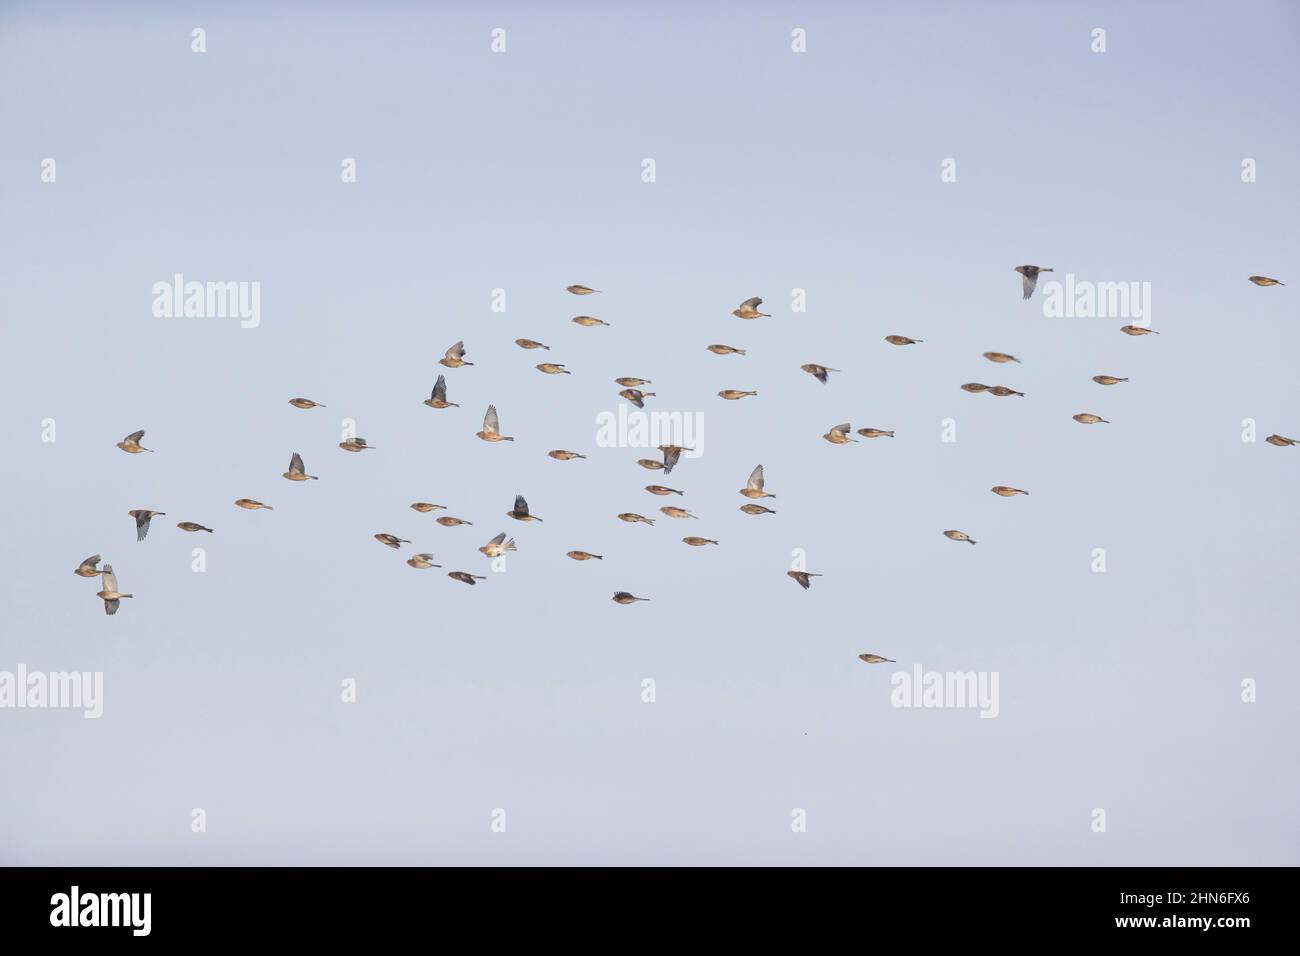 Common Linnet (Carduelis cannabina) winter plumage adults and Twite (Carduelis flavirostris) adults flying, Suffolk, England, January Stock Photo